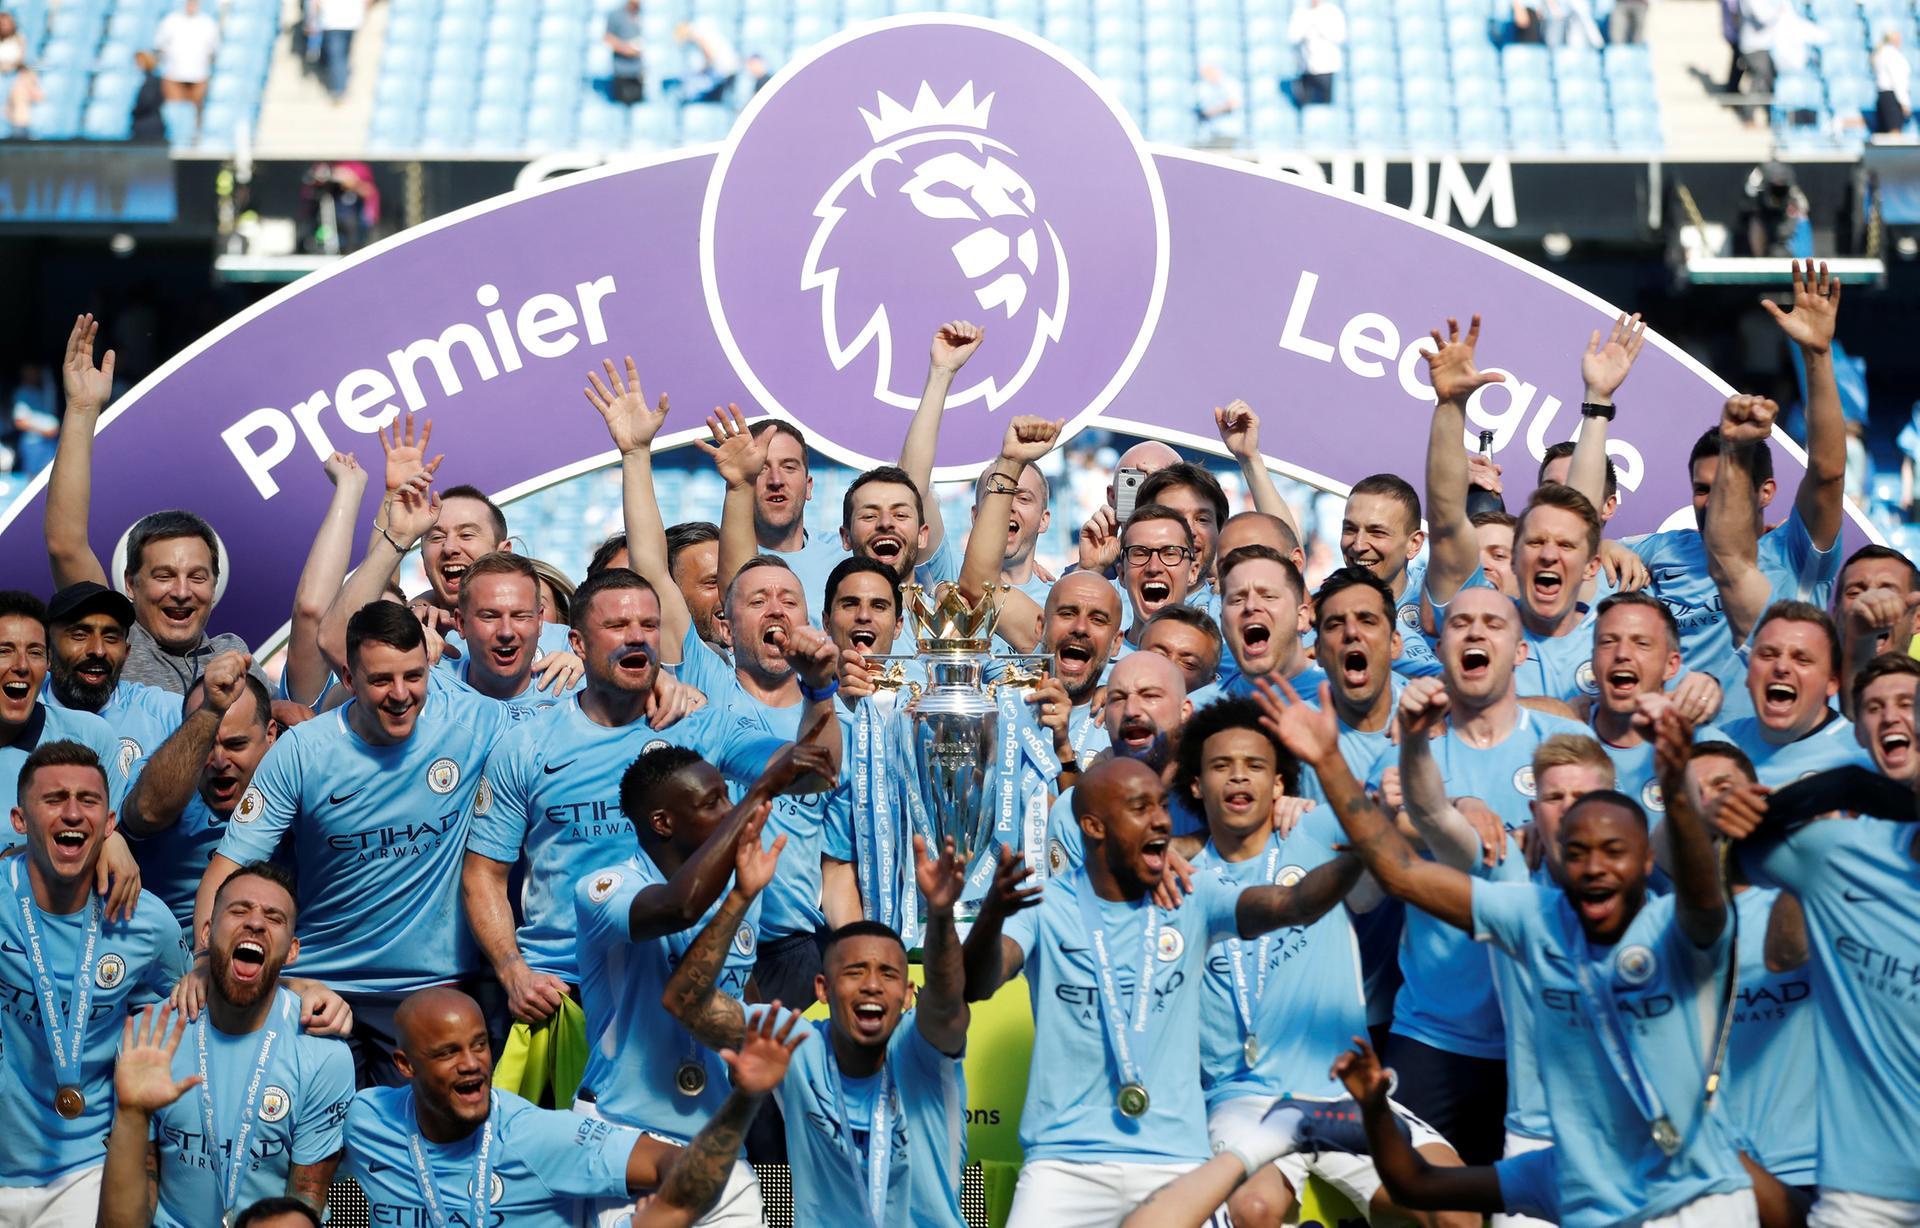 Premier League champions 2018-19: By the numbers